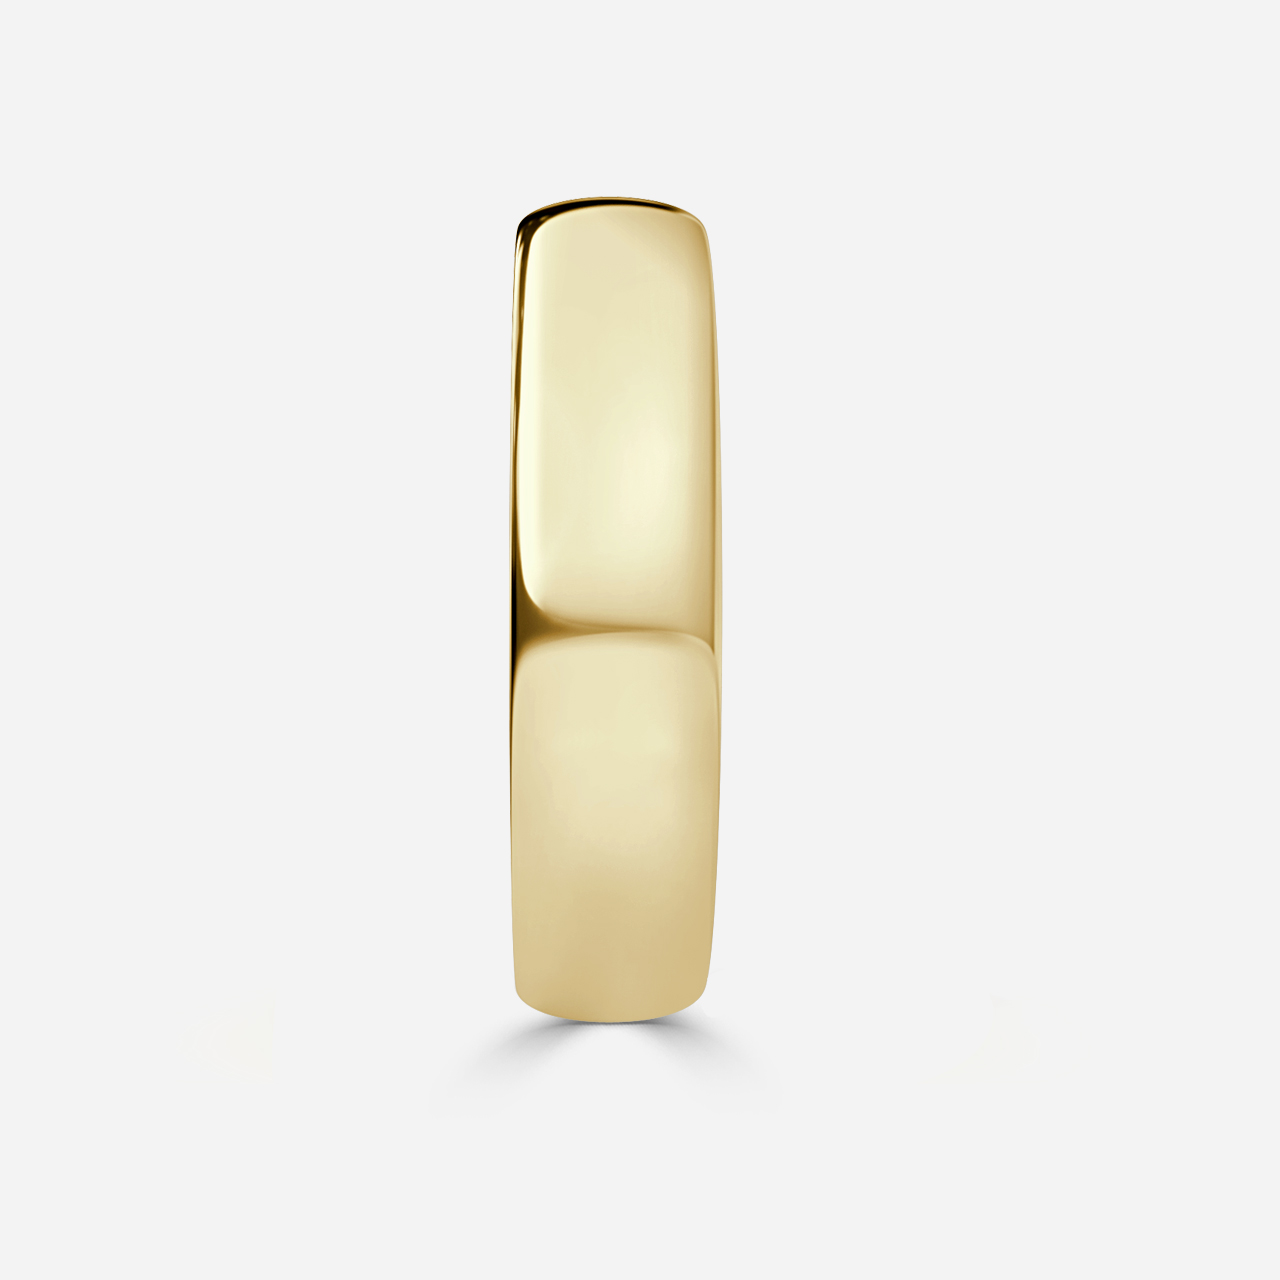 D-Court Wedding Ring In Yellow Gold